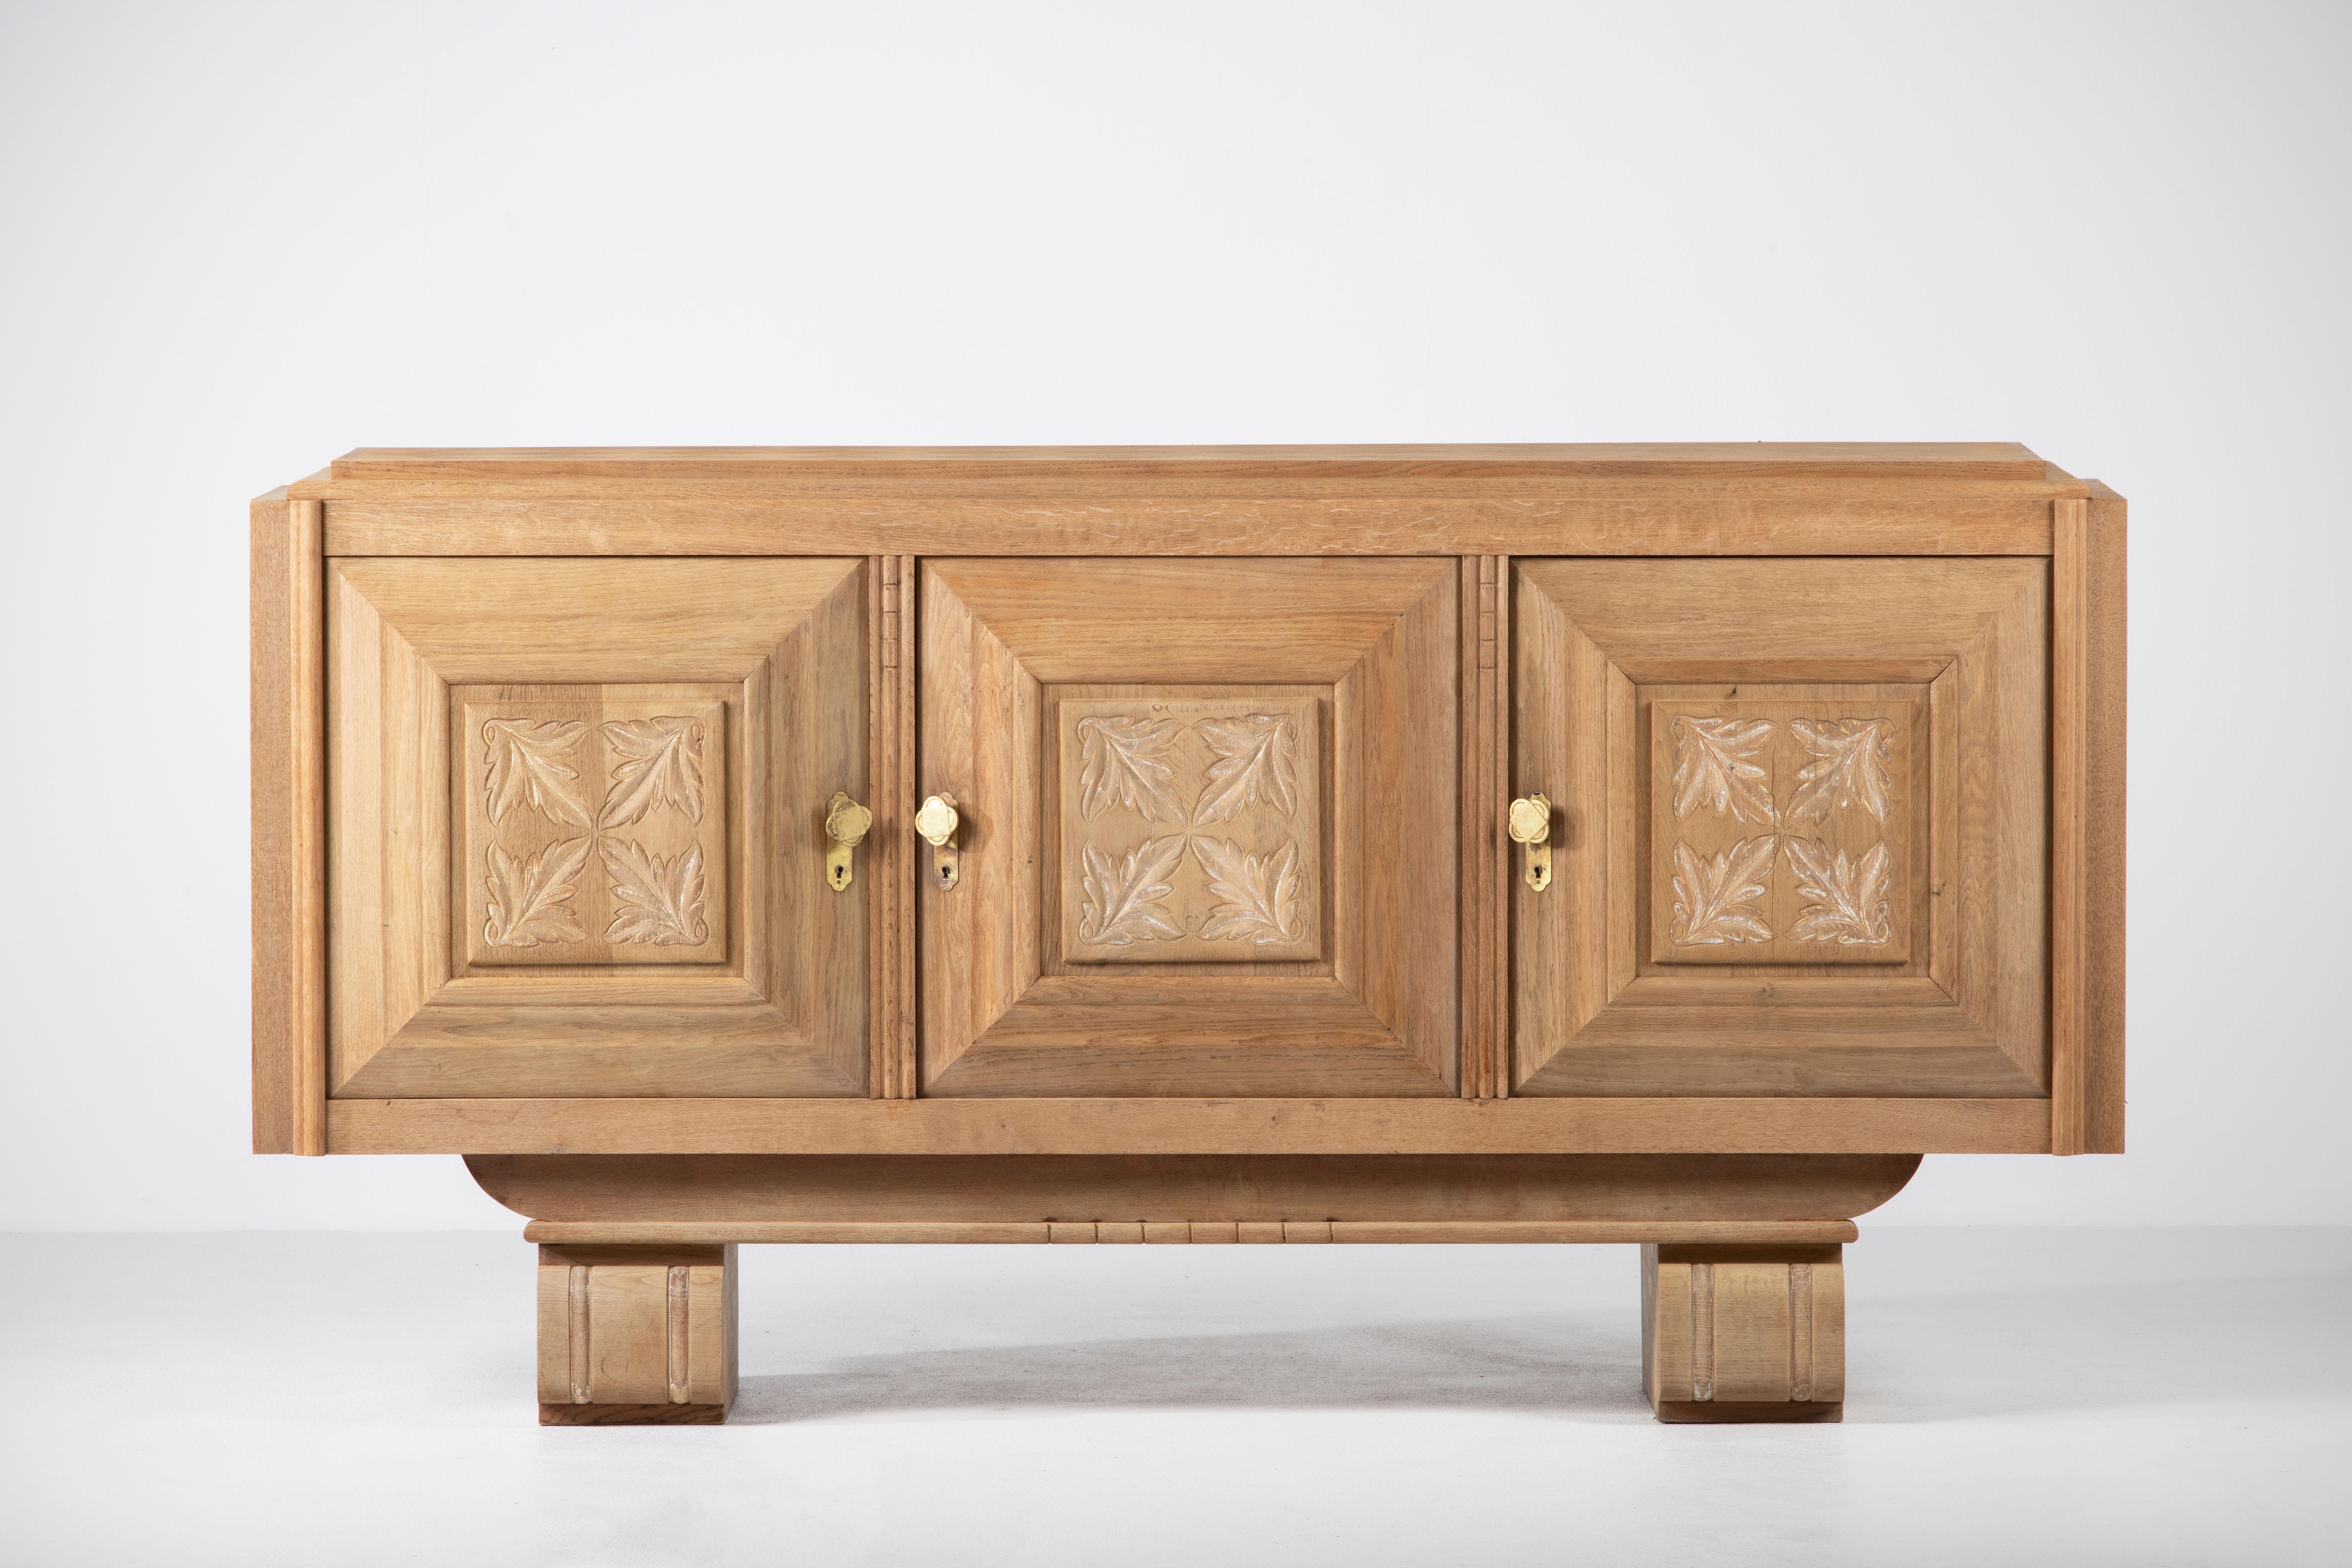 Very elegant Credenza in solid oak, France, 1940s.
Large Art Deco Brutalist sideboard. 
The credenza consists of three storage facilities and covered with very detailed designed doors. 
Very elegant 
The refined wooden structures on the doors